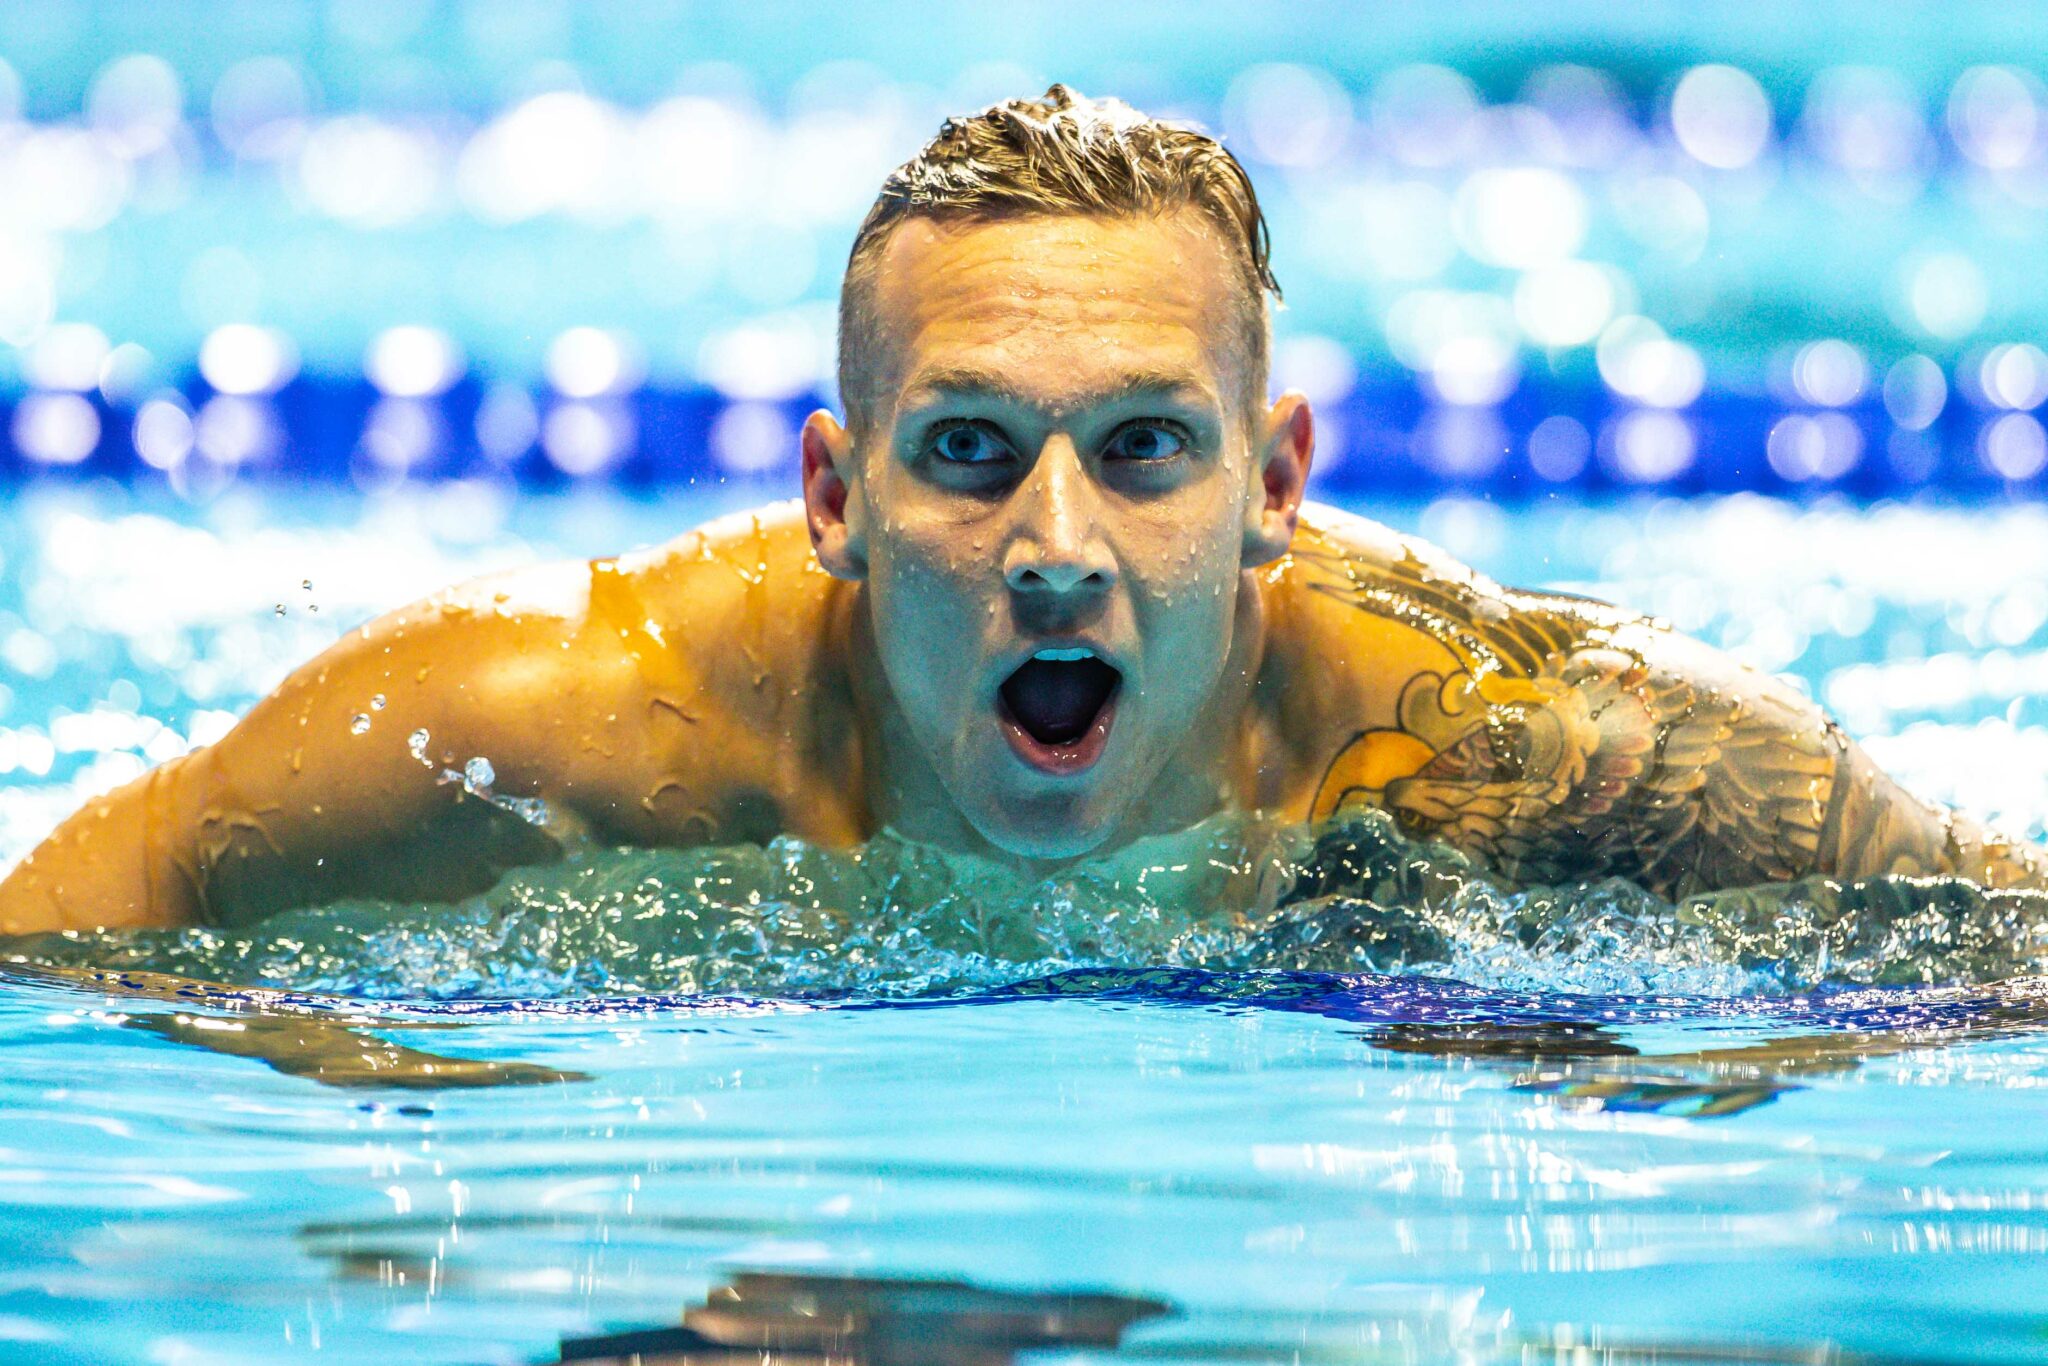 I'm flummoxed over why Caeleb Dressel is only listed for four events (...